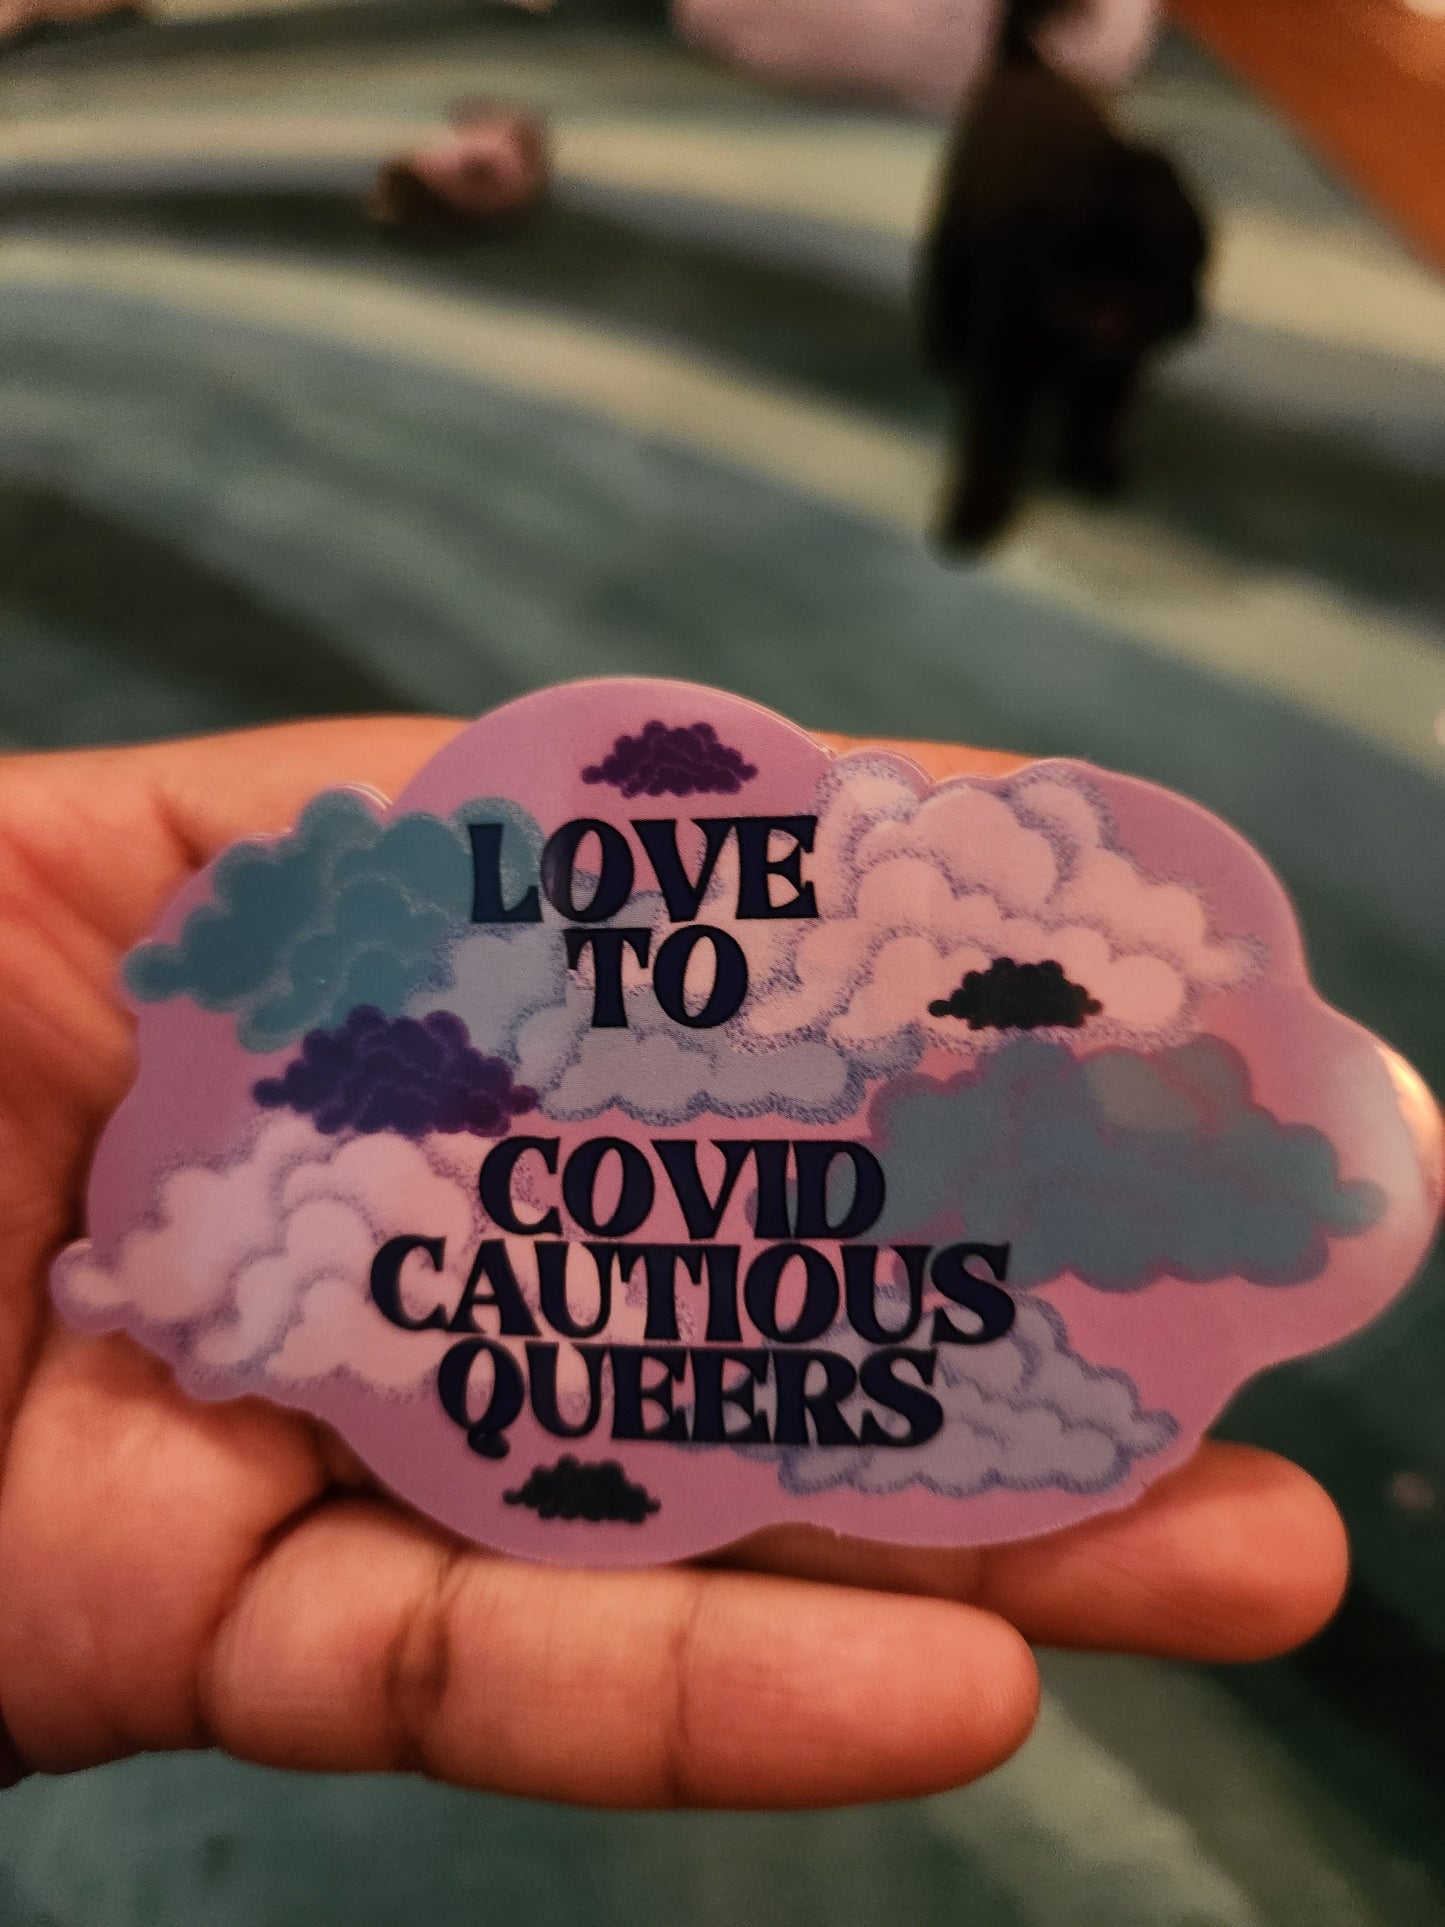 Love to Covid Cautious Queers!